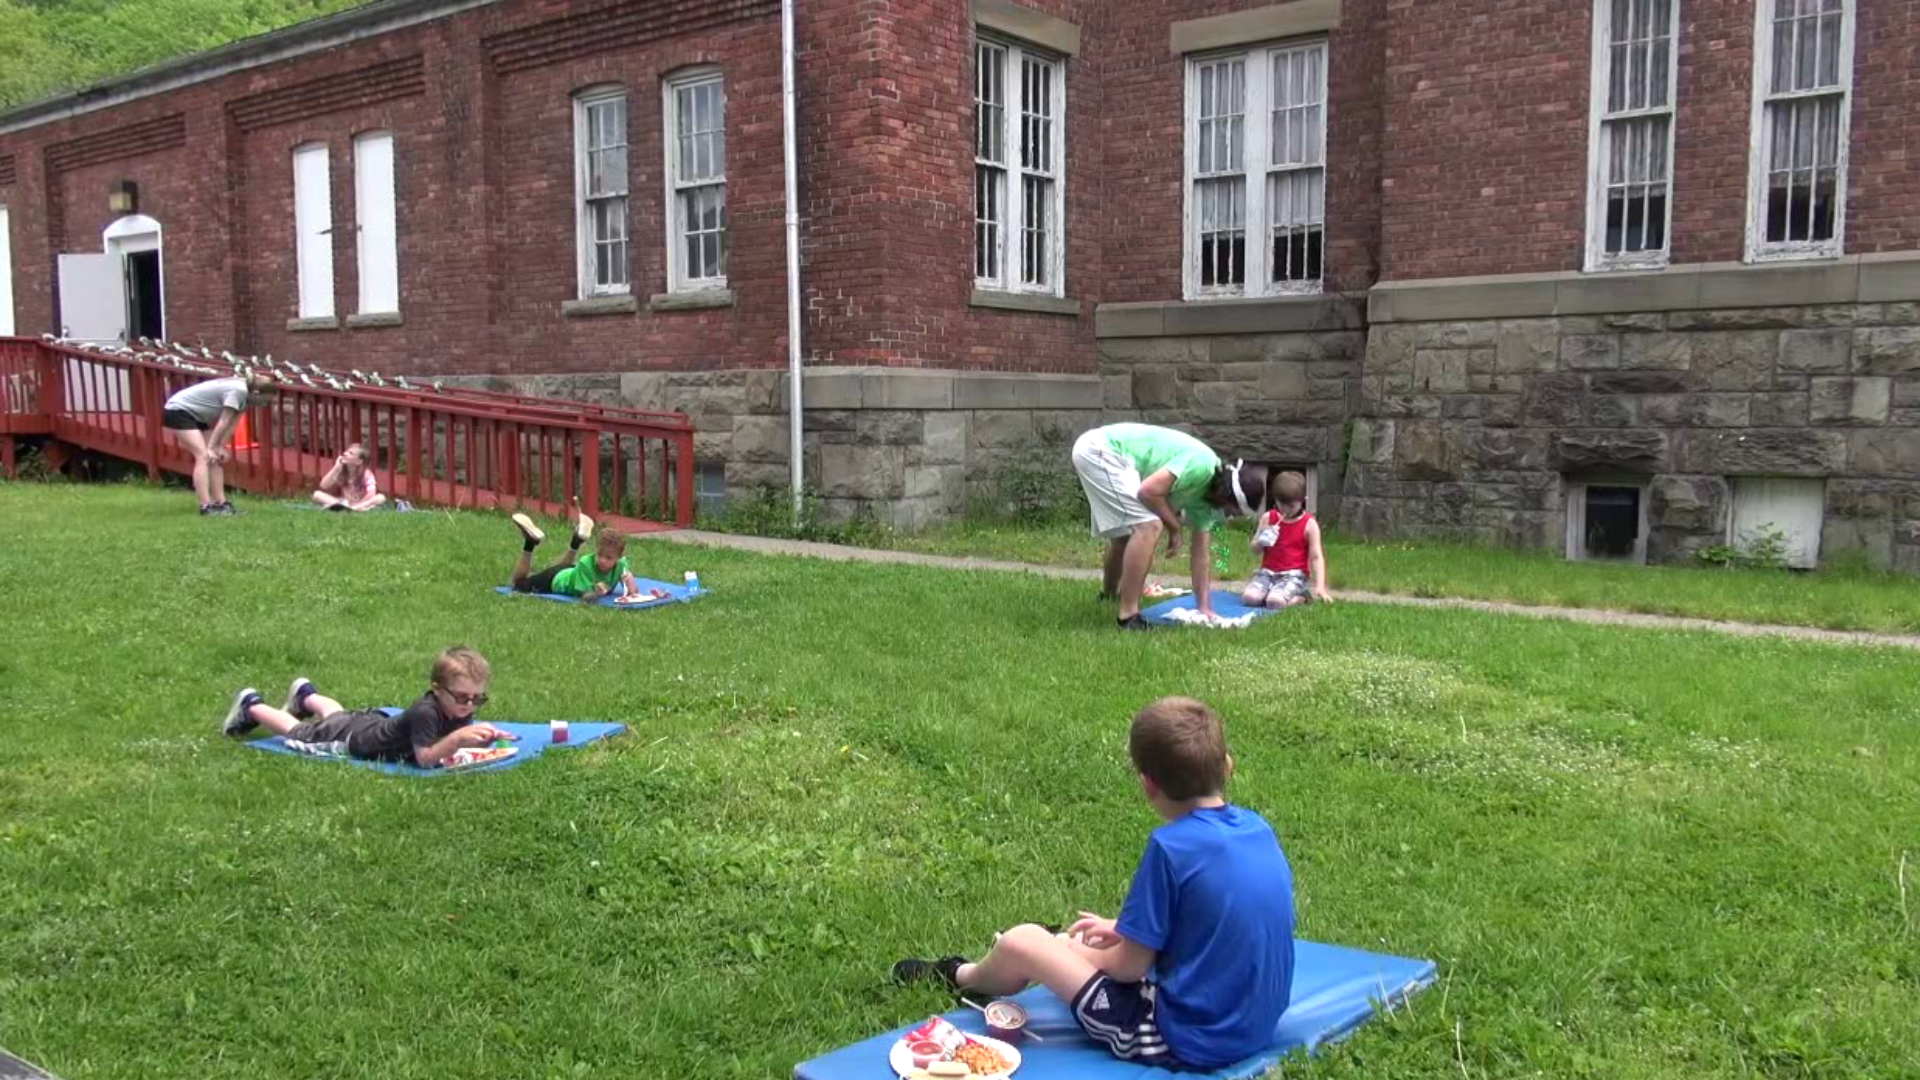 A daycare activity has gained a lot of attention in the Honesdale area.